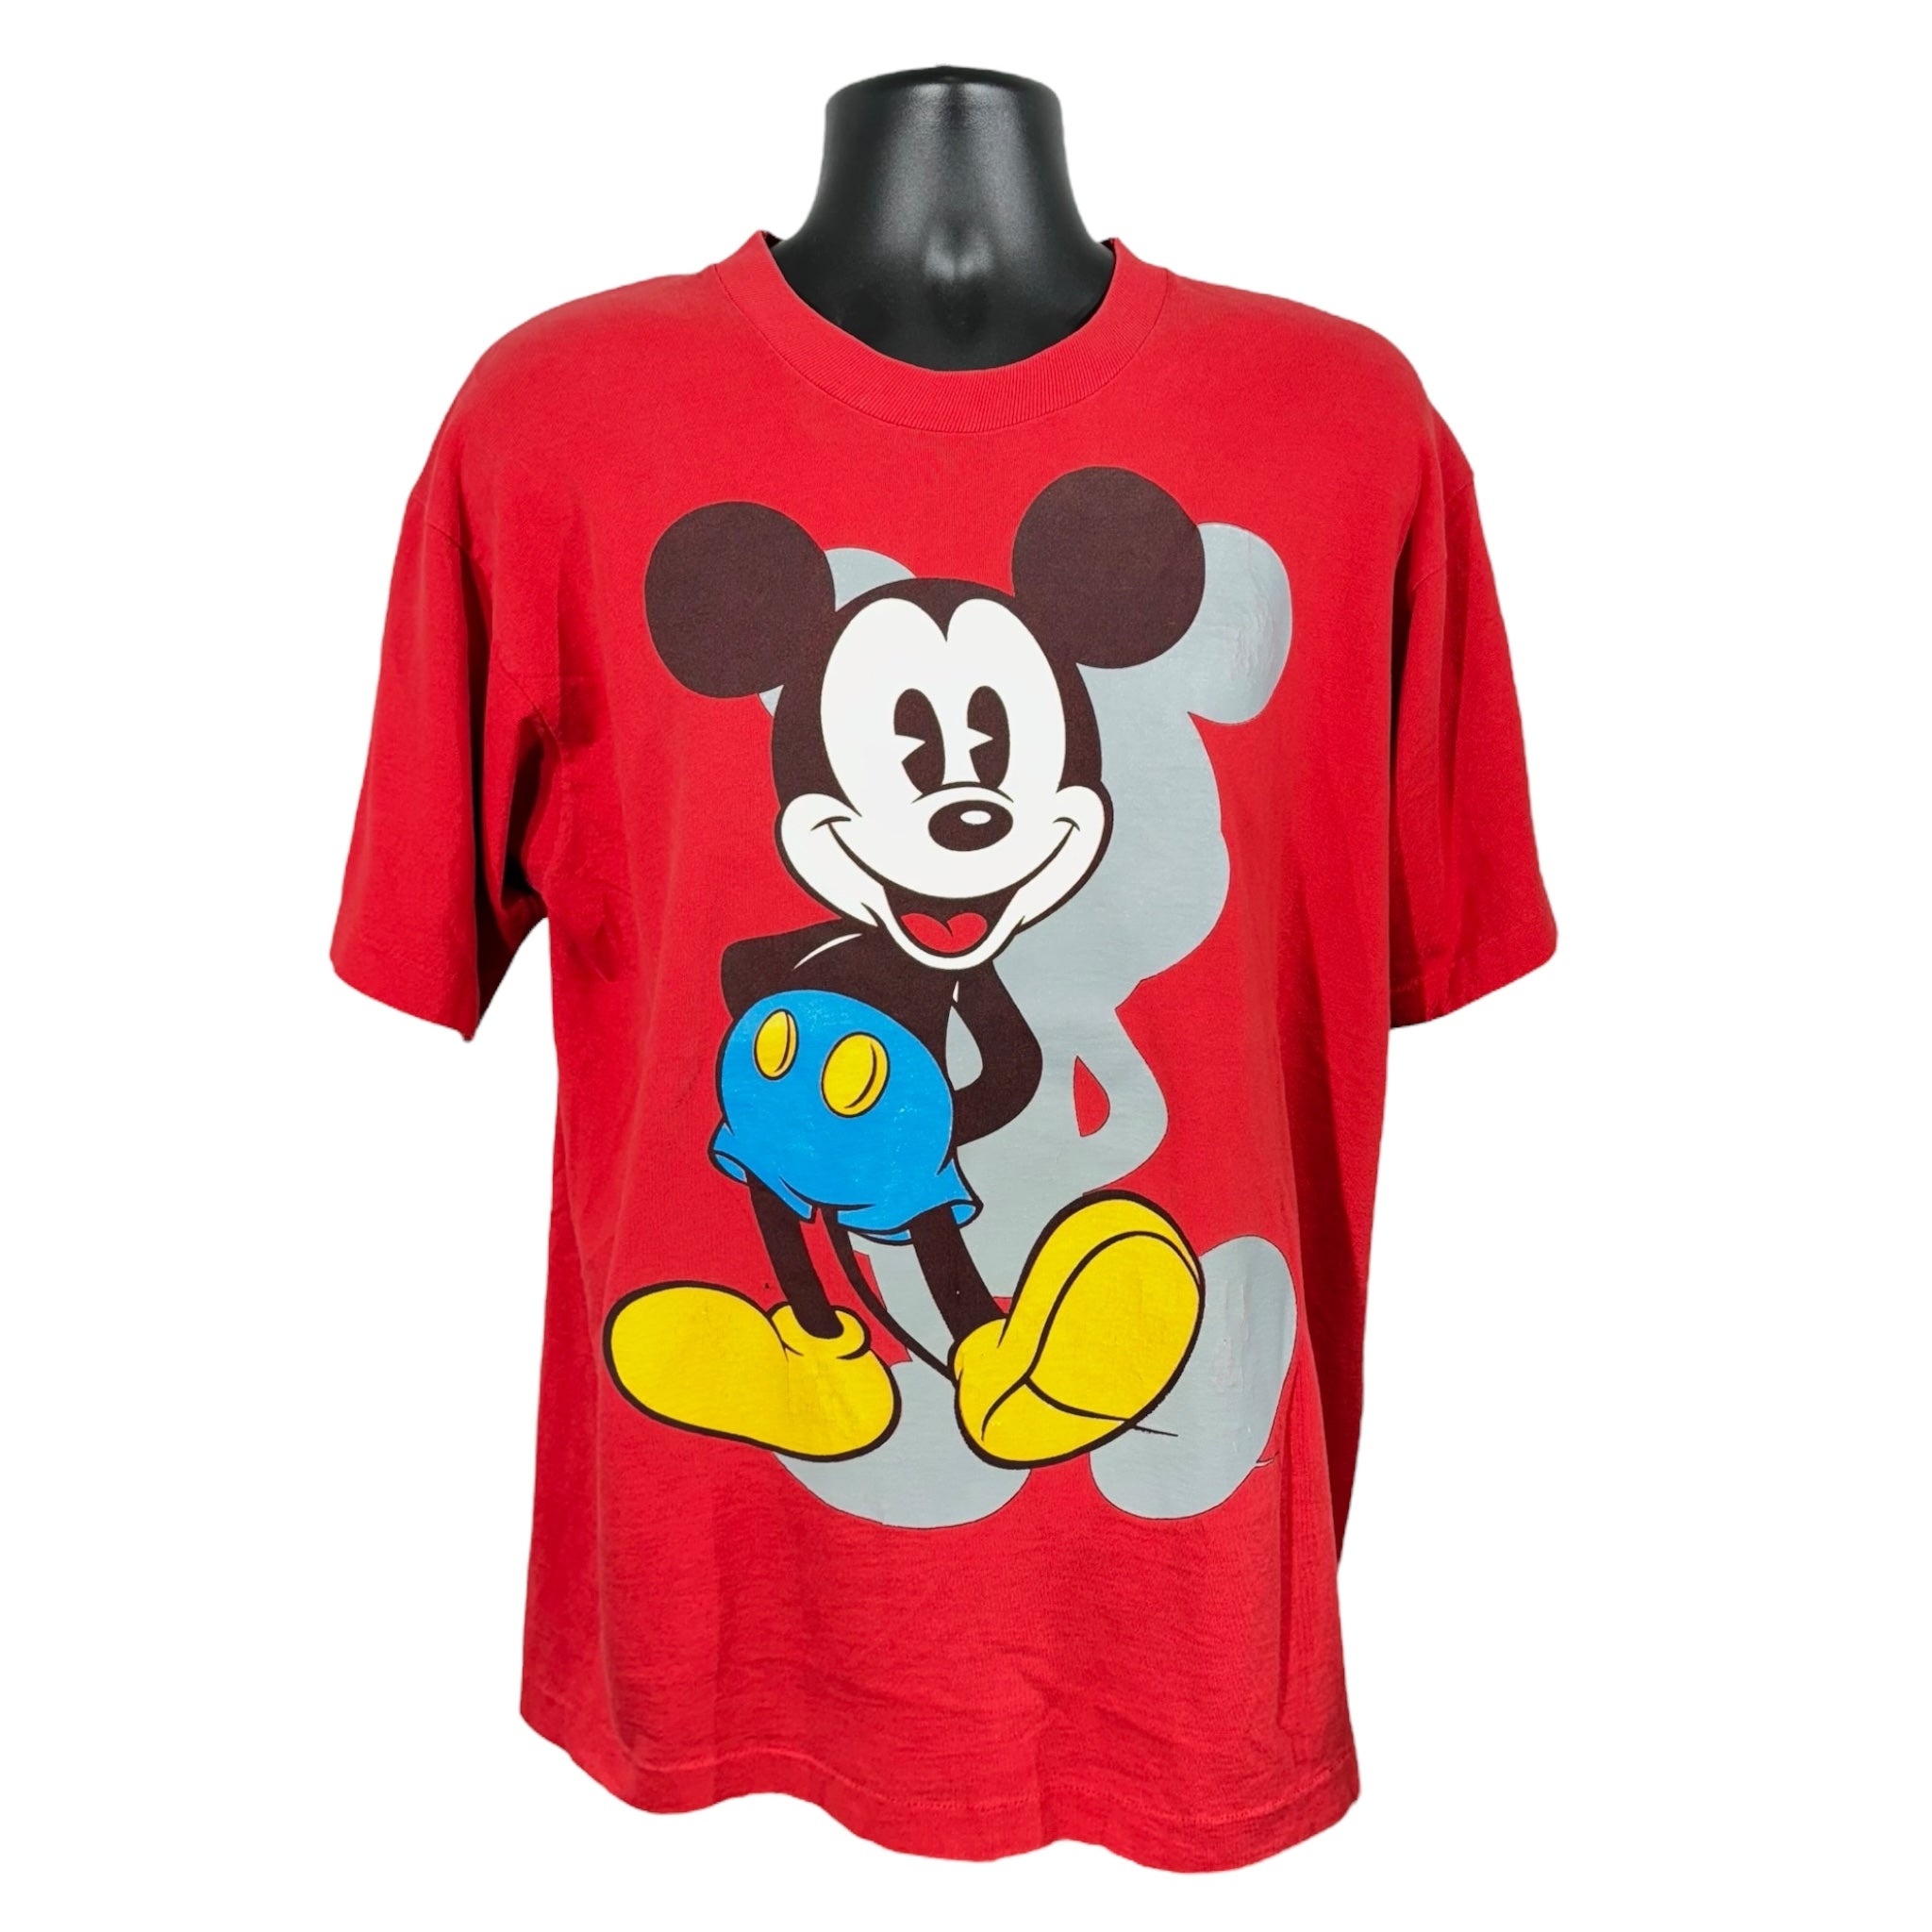 Vintage Mickey Mouse Tee 90s